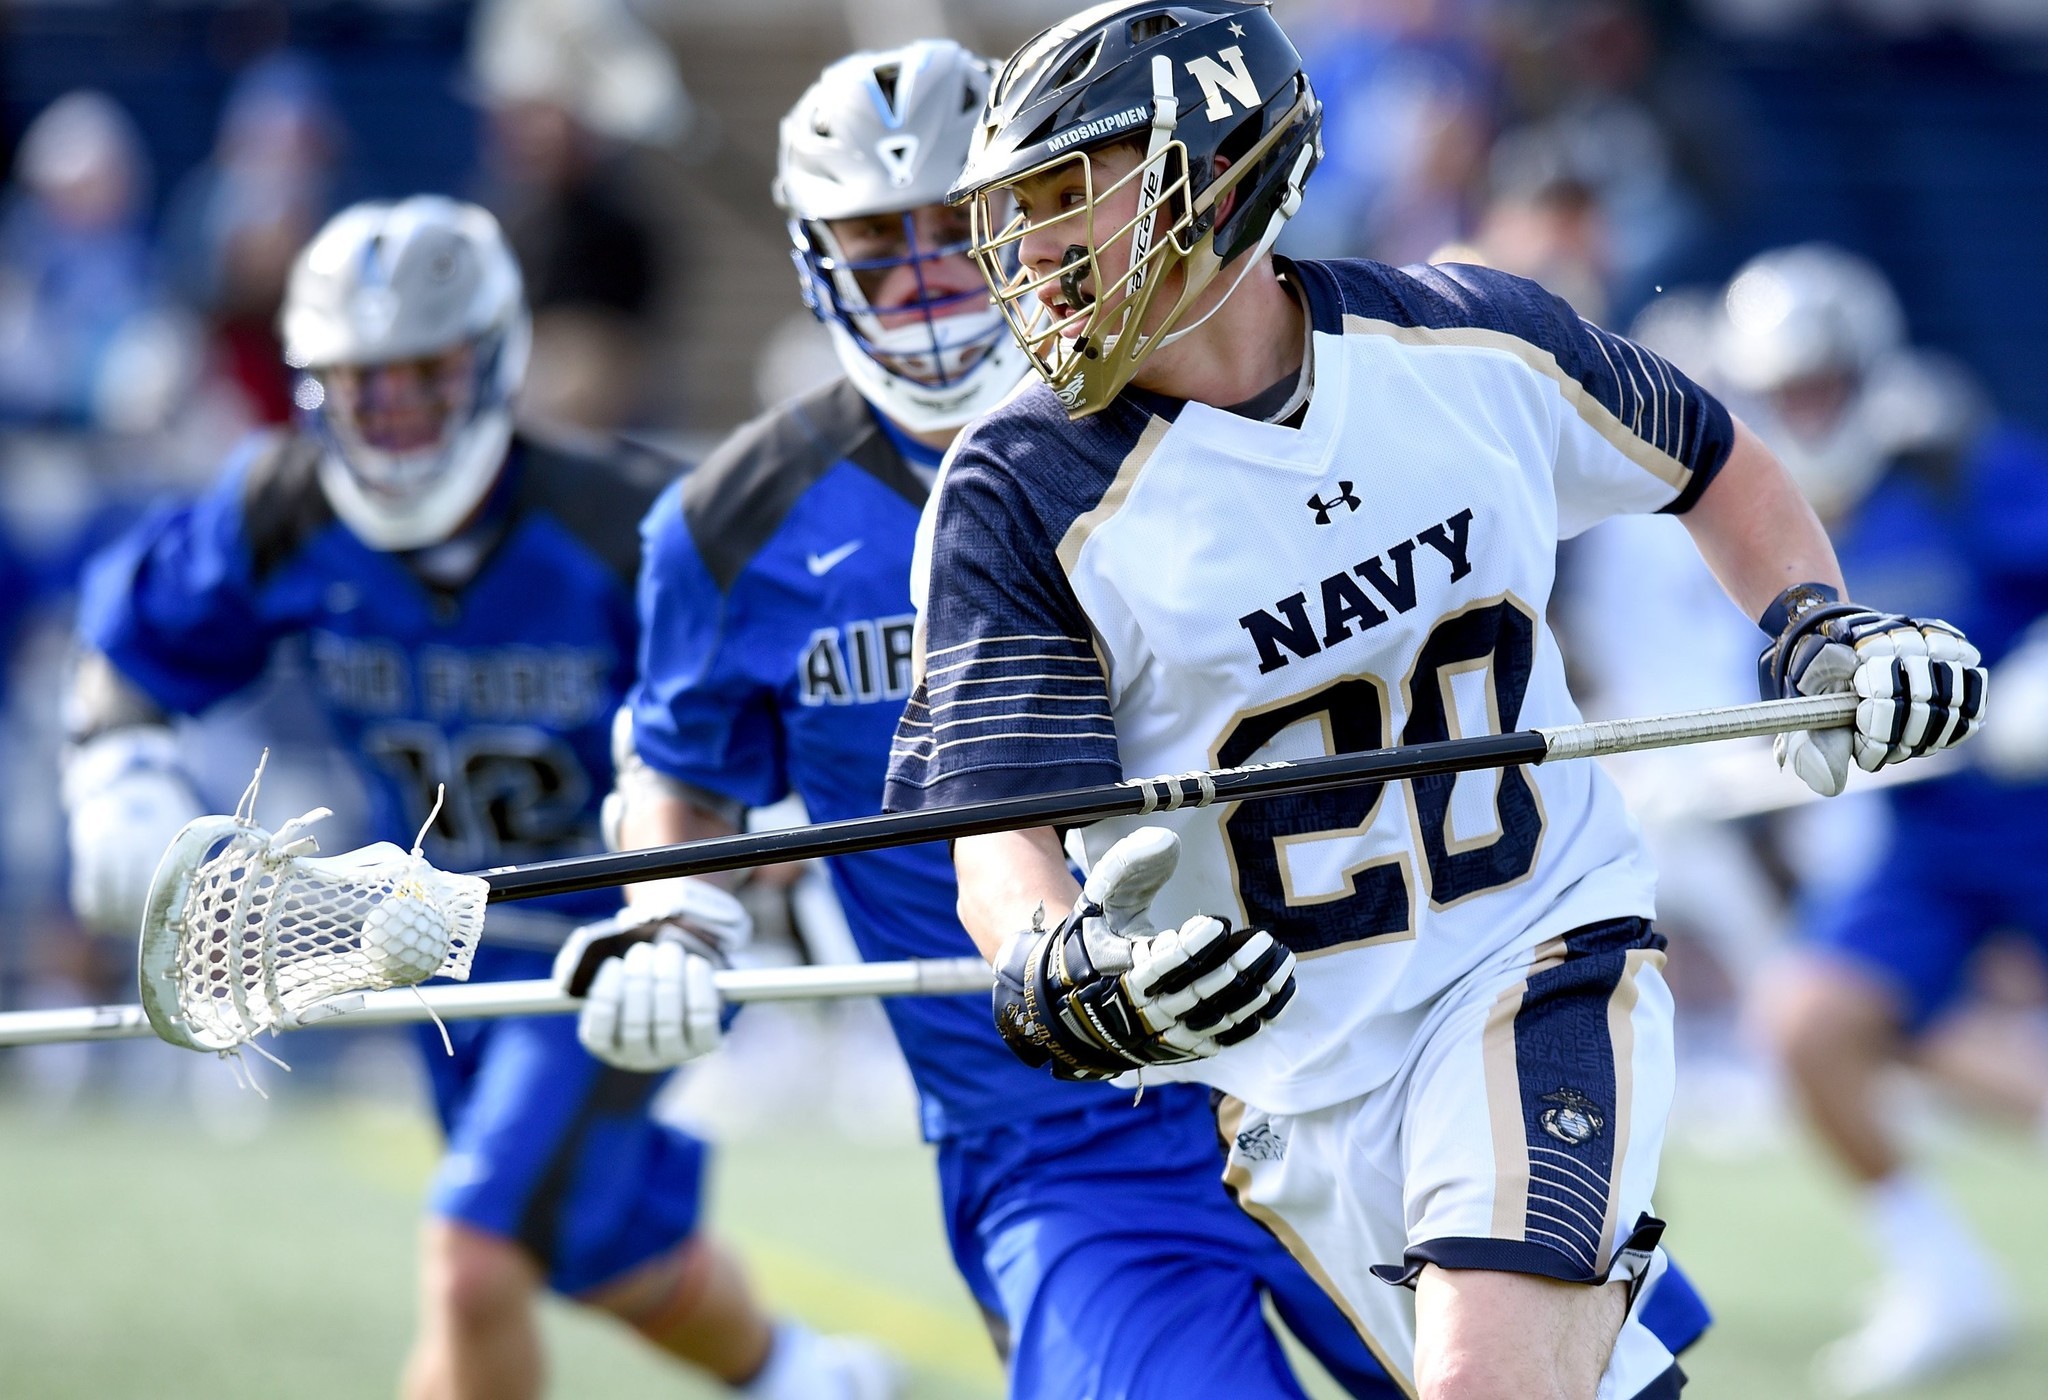 Matt Rees uses variety of tools in becoming career leader in caused turnovers for Navy lacrosse